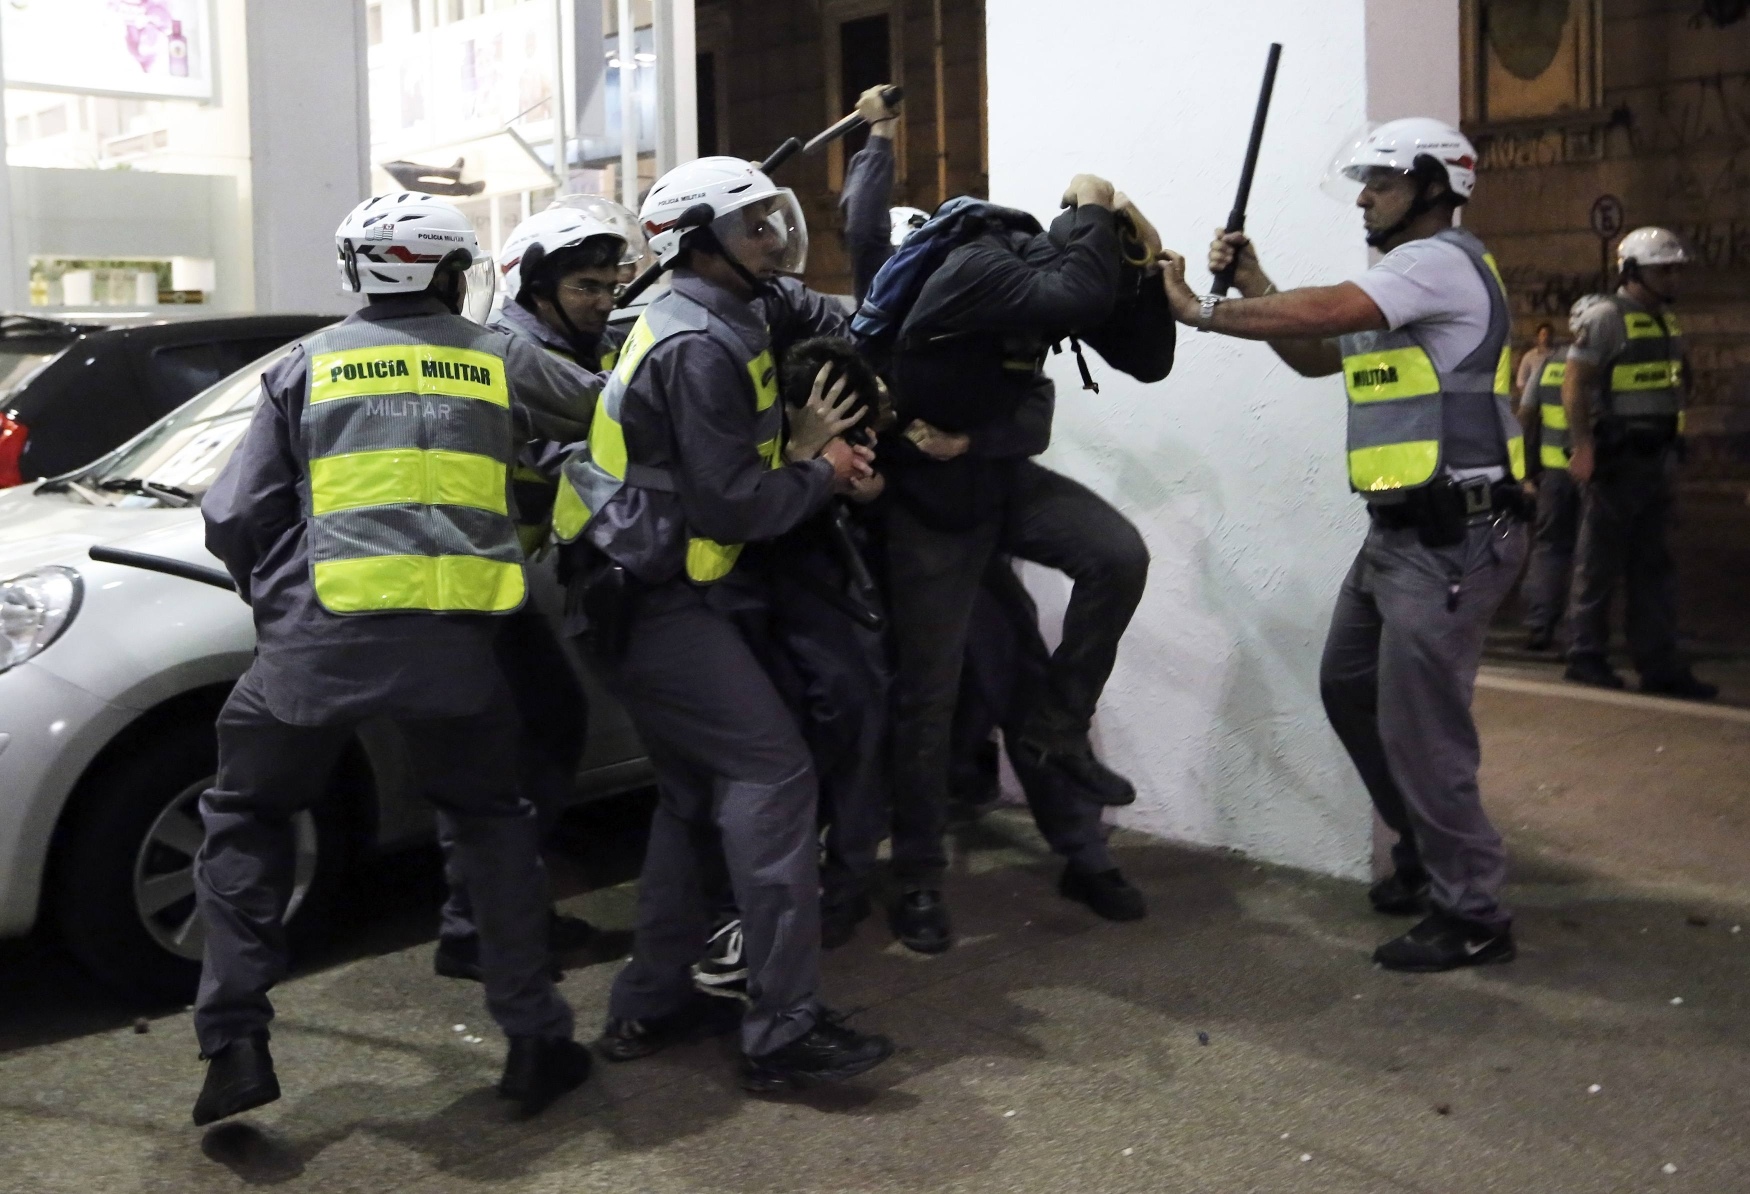 Violence in Rio de Janeiro, Brazil. A new report shows that more than one million people were murdered in Brazil between 1980 and 2011. Photo: Reuters